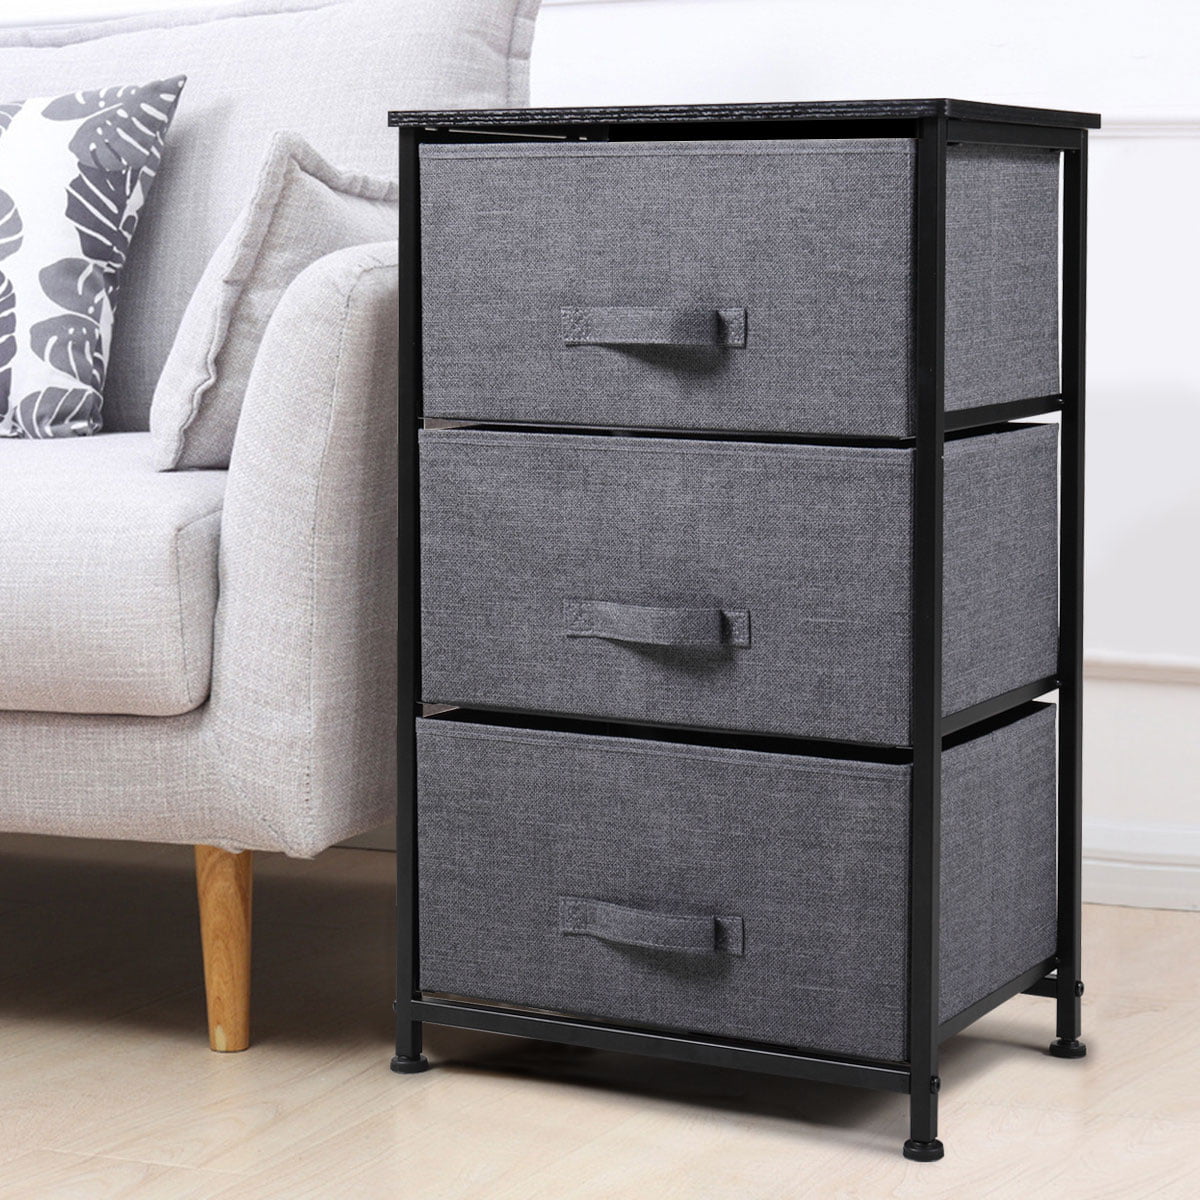 Fabric Cabinet Storage Unit Chest of Drawers Metal Frame Organiser Bedside Table 